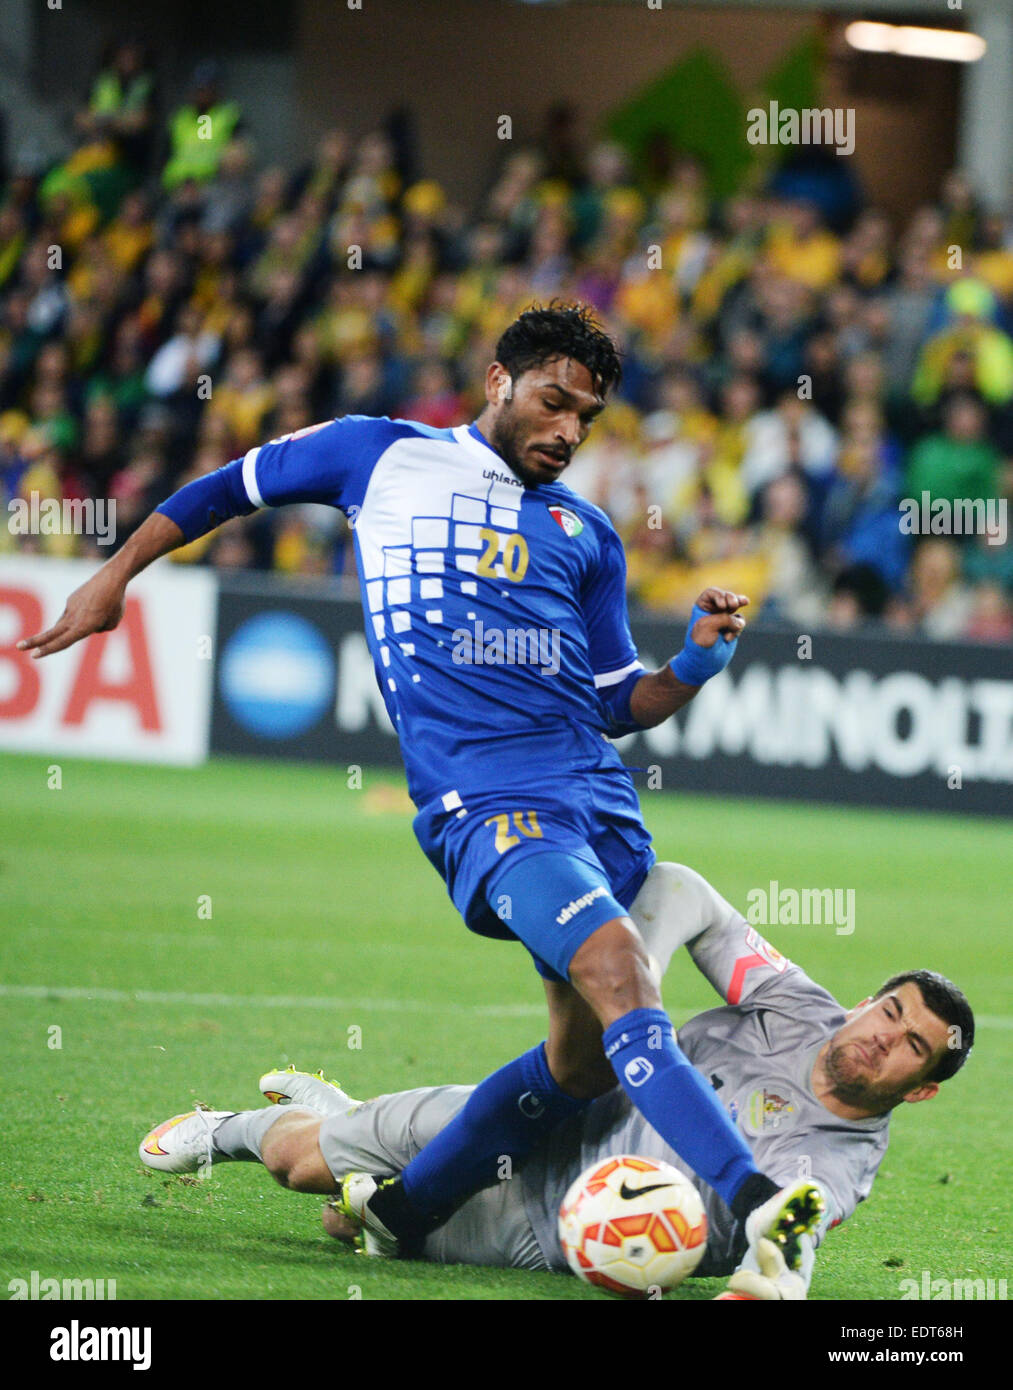 Melbourne, Australia. 9th Jan, 2015. Yousef Naser Alsulaiman (top) of Kuwait vies with Mathew Ryan of Australia during the opening football match at the AFC Asian Cup in Melbourne, Australia, January 9, 2015. Australia won 4-1. Credit:  Qin Qing/Xinhua/Alamy Live News Stock Photo